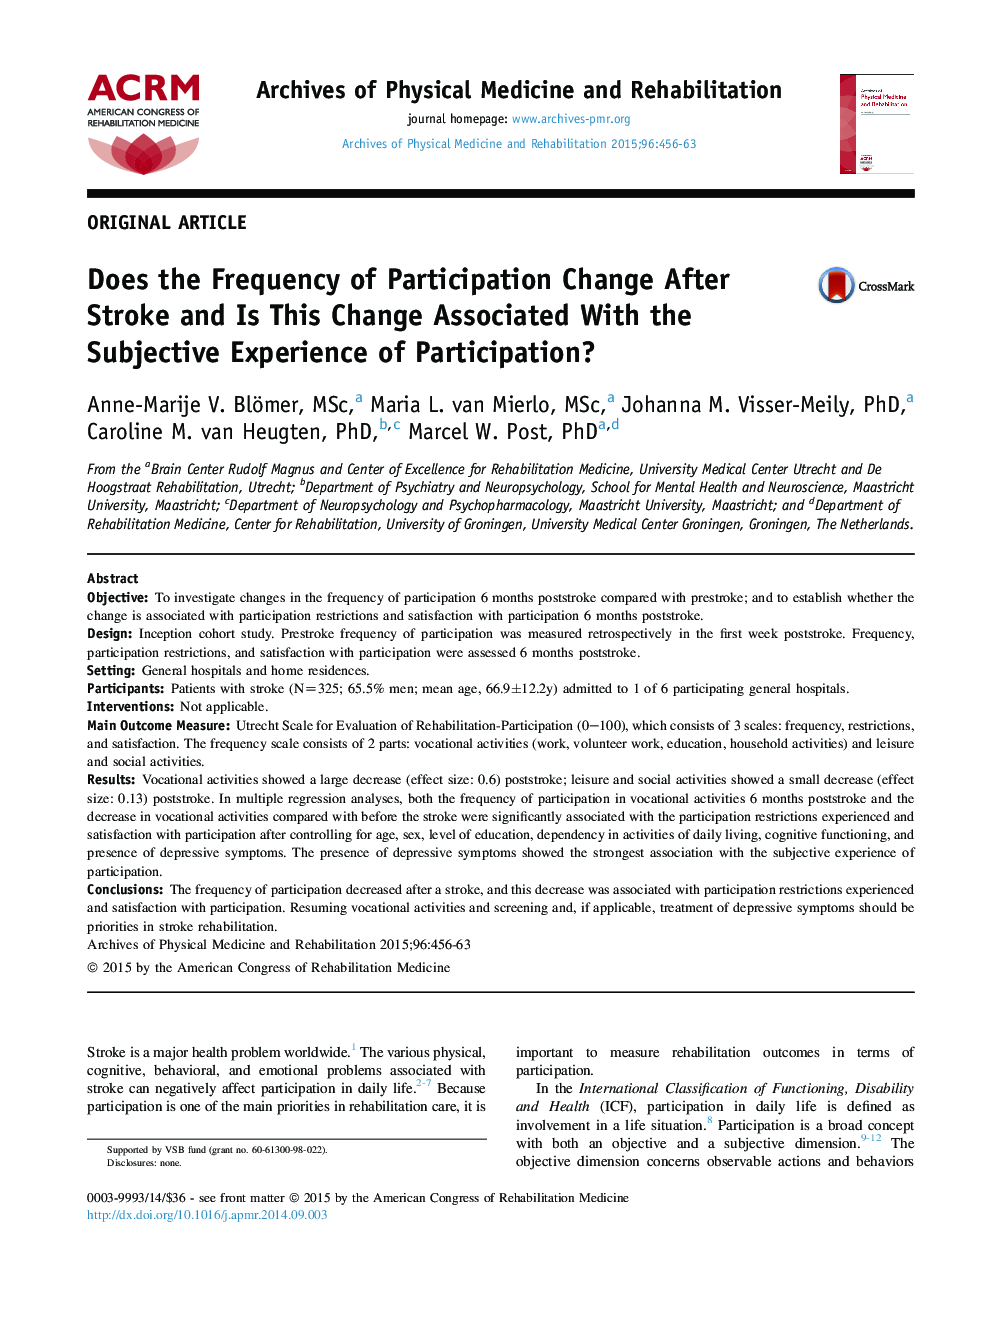 Does the Frequency of Participation Change After Stroke and Is This Change Associated With the Subjective Experience of Participation?